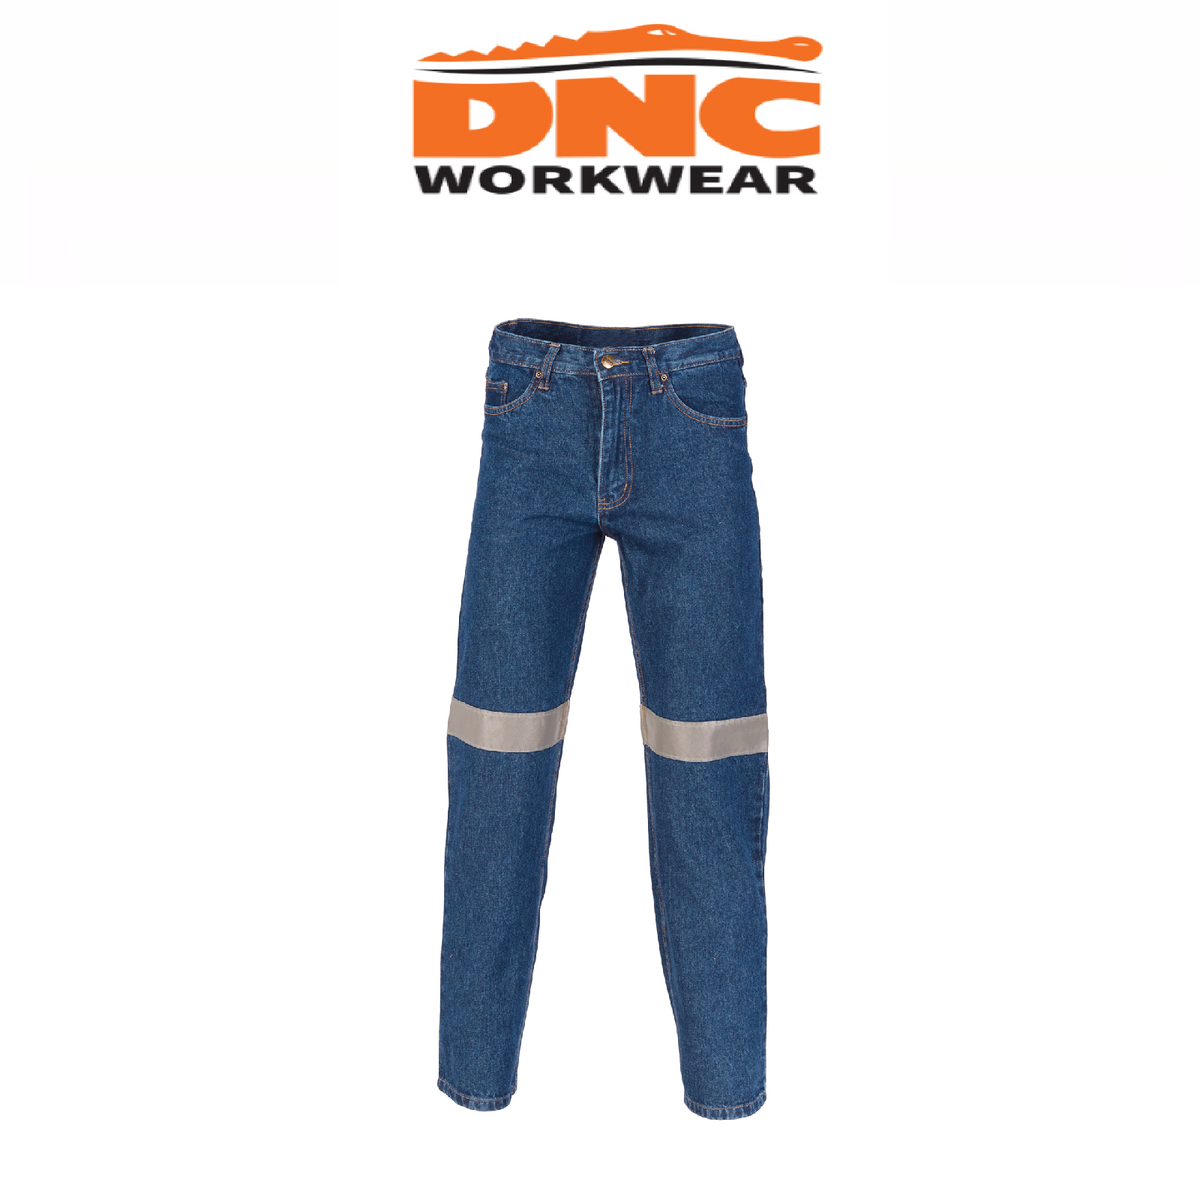 DNC Workwear Womens Taped Denim Stretch Jeans Reflective Comfortable 3347